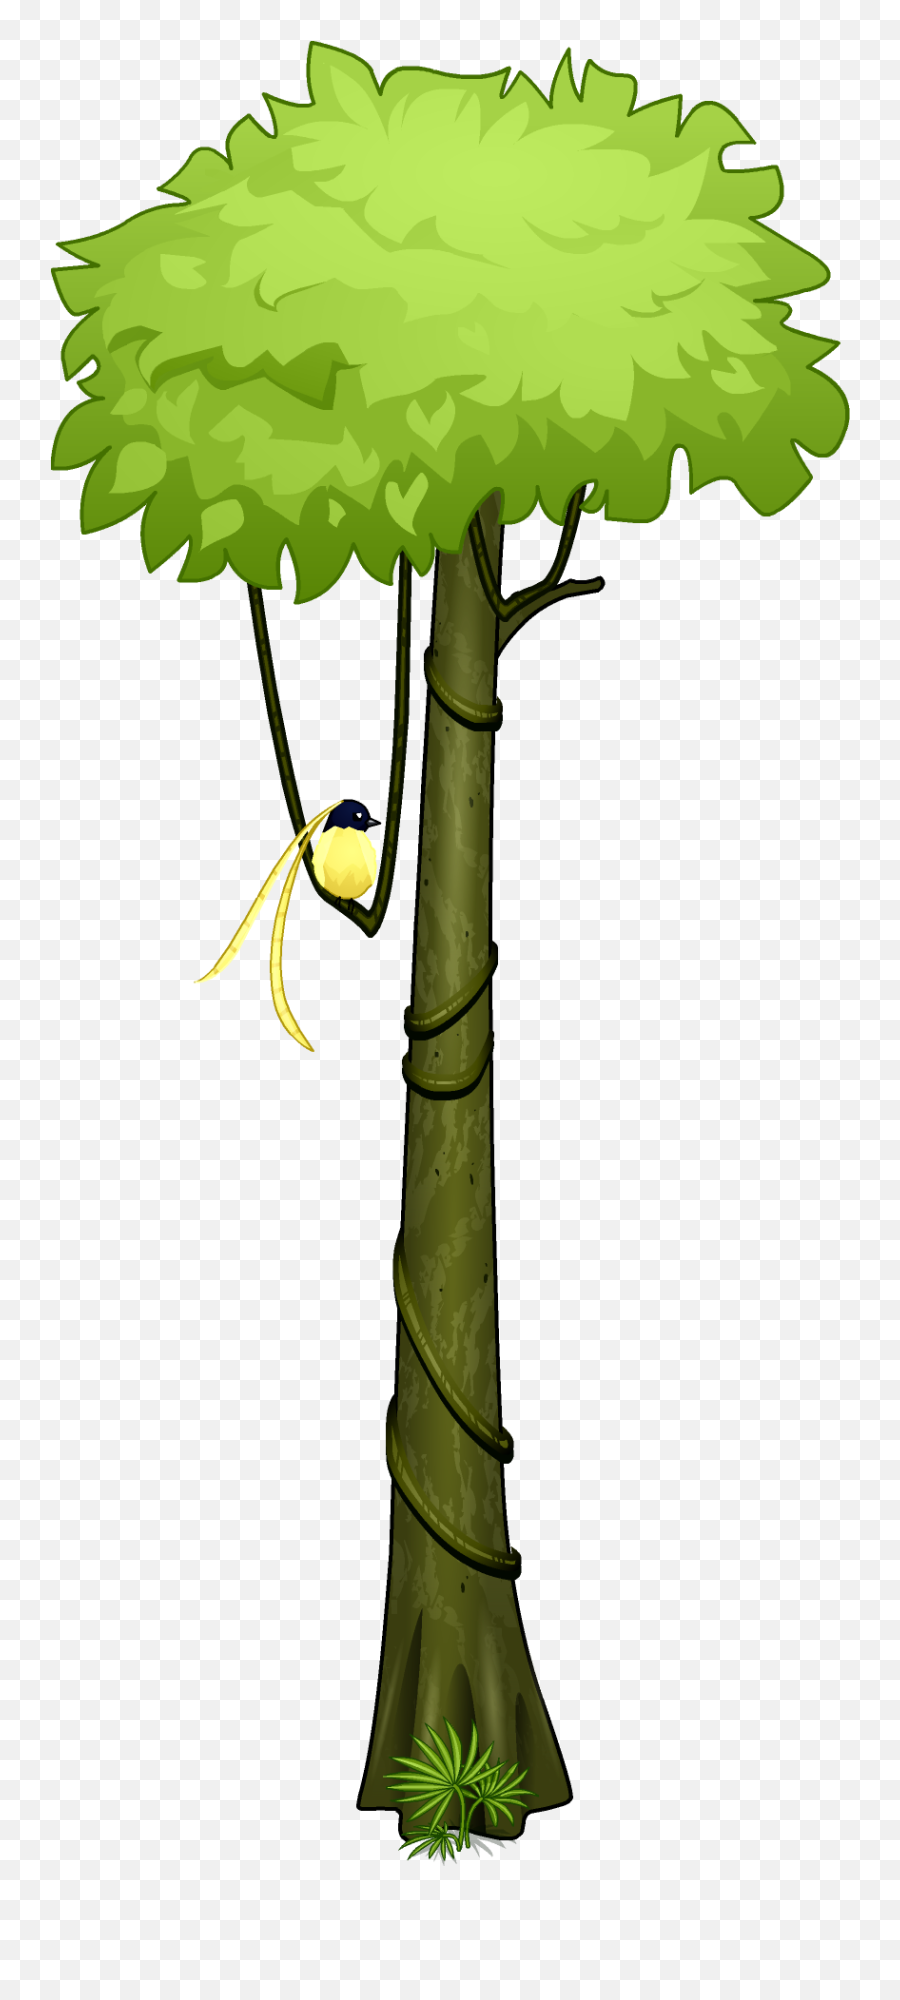 Download Amazon Rainforest Clipart At - Draw A Amazon Rainforest Tree Emoji,Rainforest Clipart